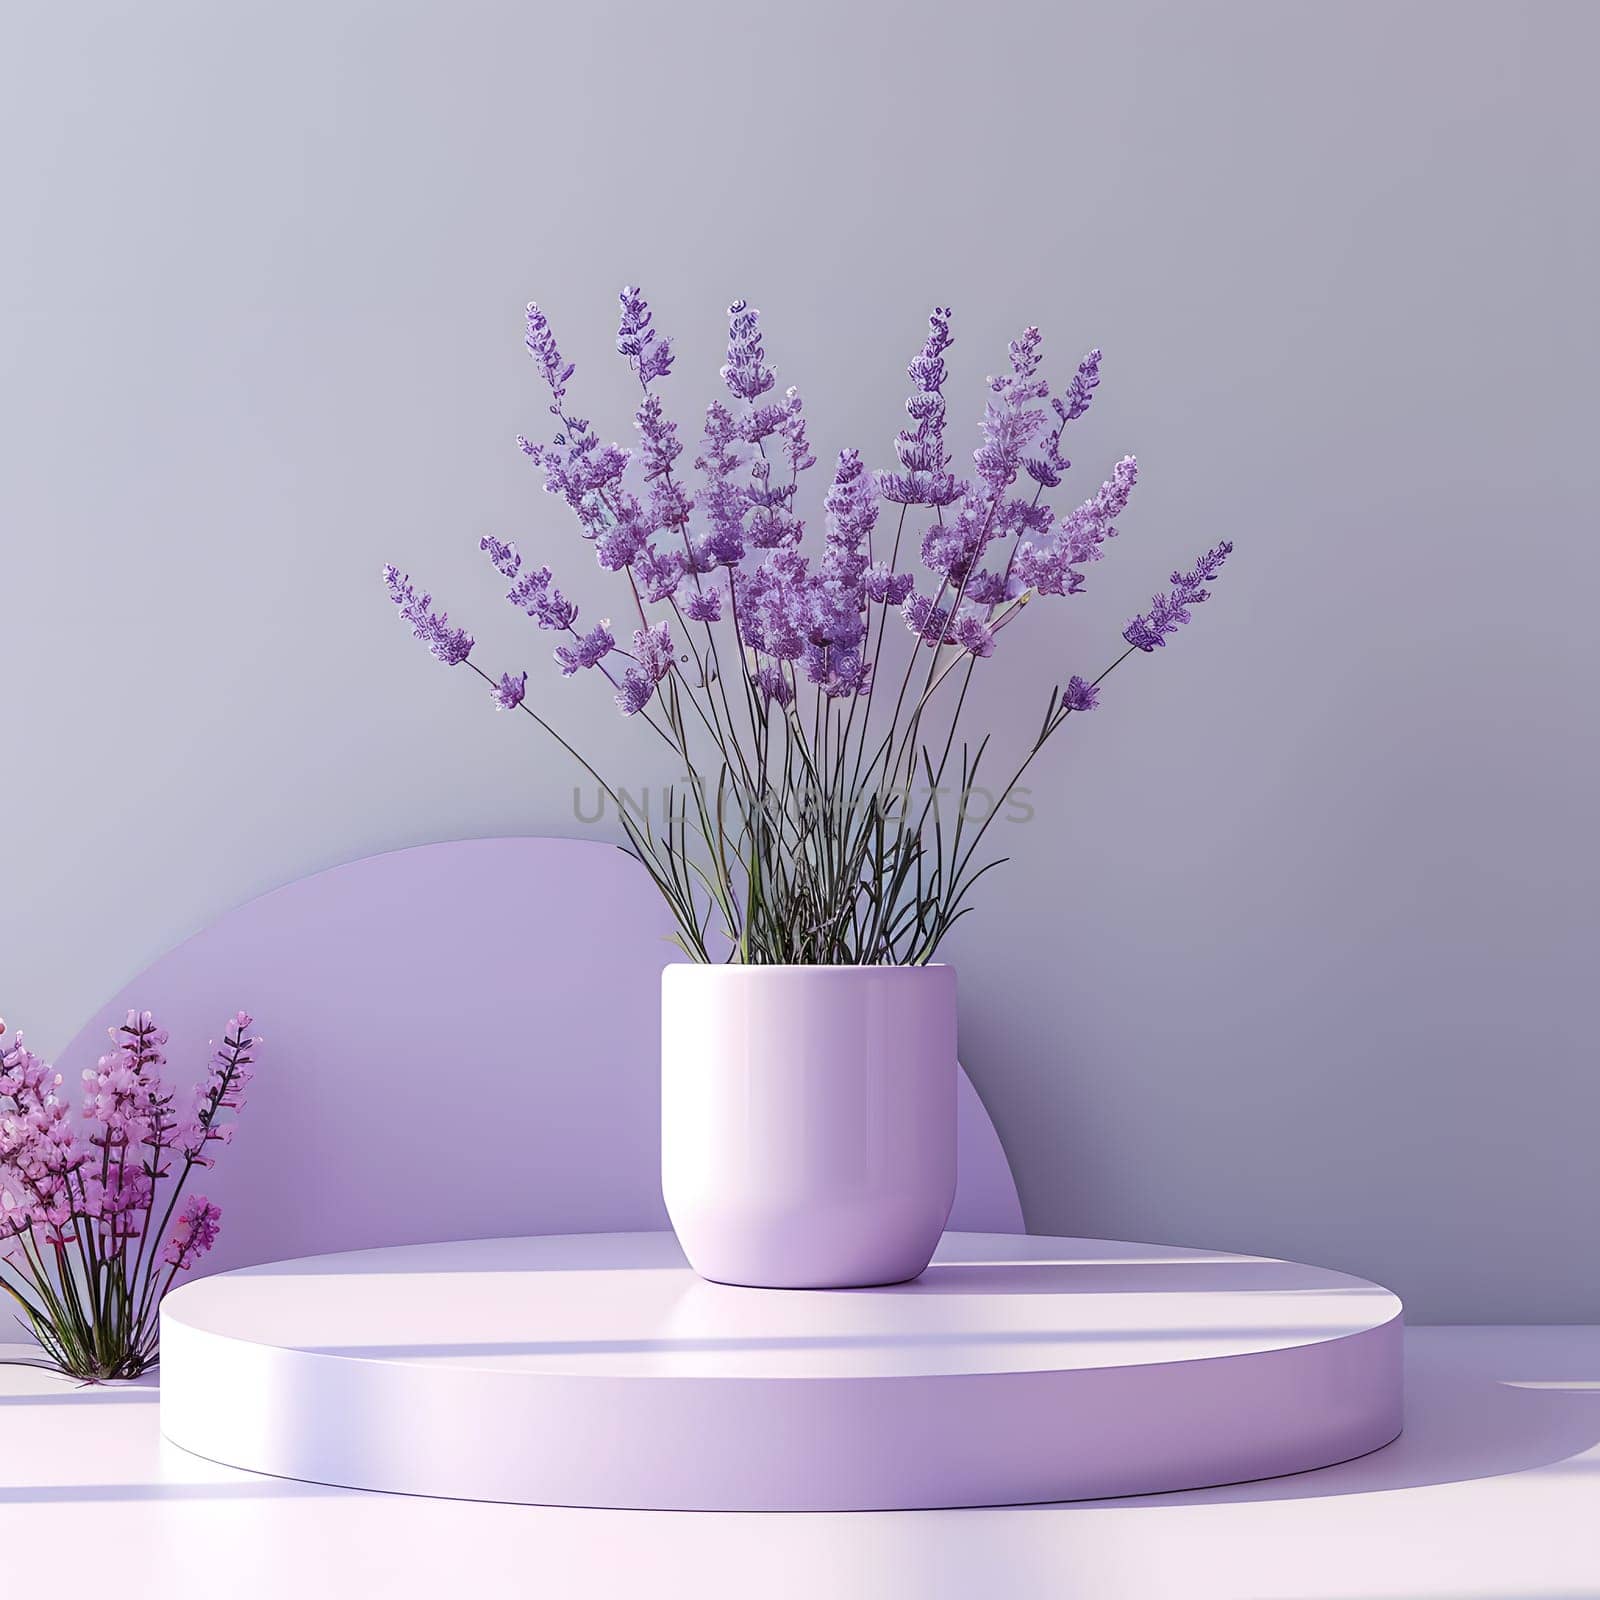 A beautiful arrangement of purple flowers sits in a vase on the table, adding a touch of color and nature to the rooms decor